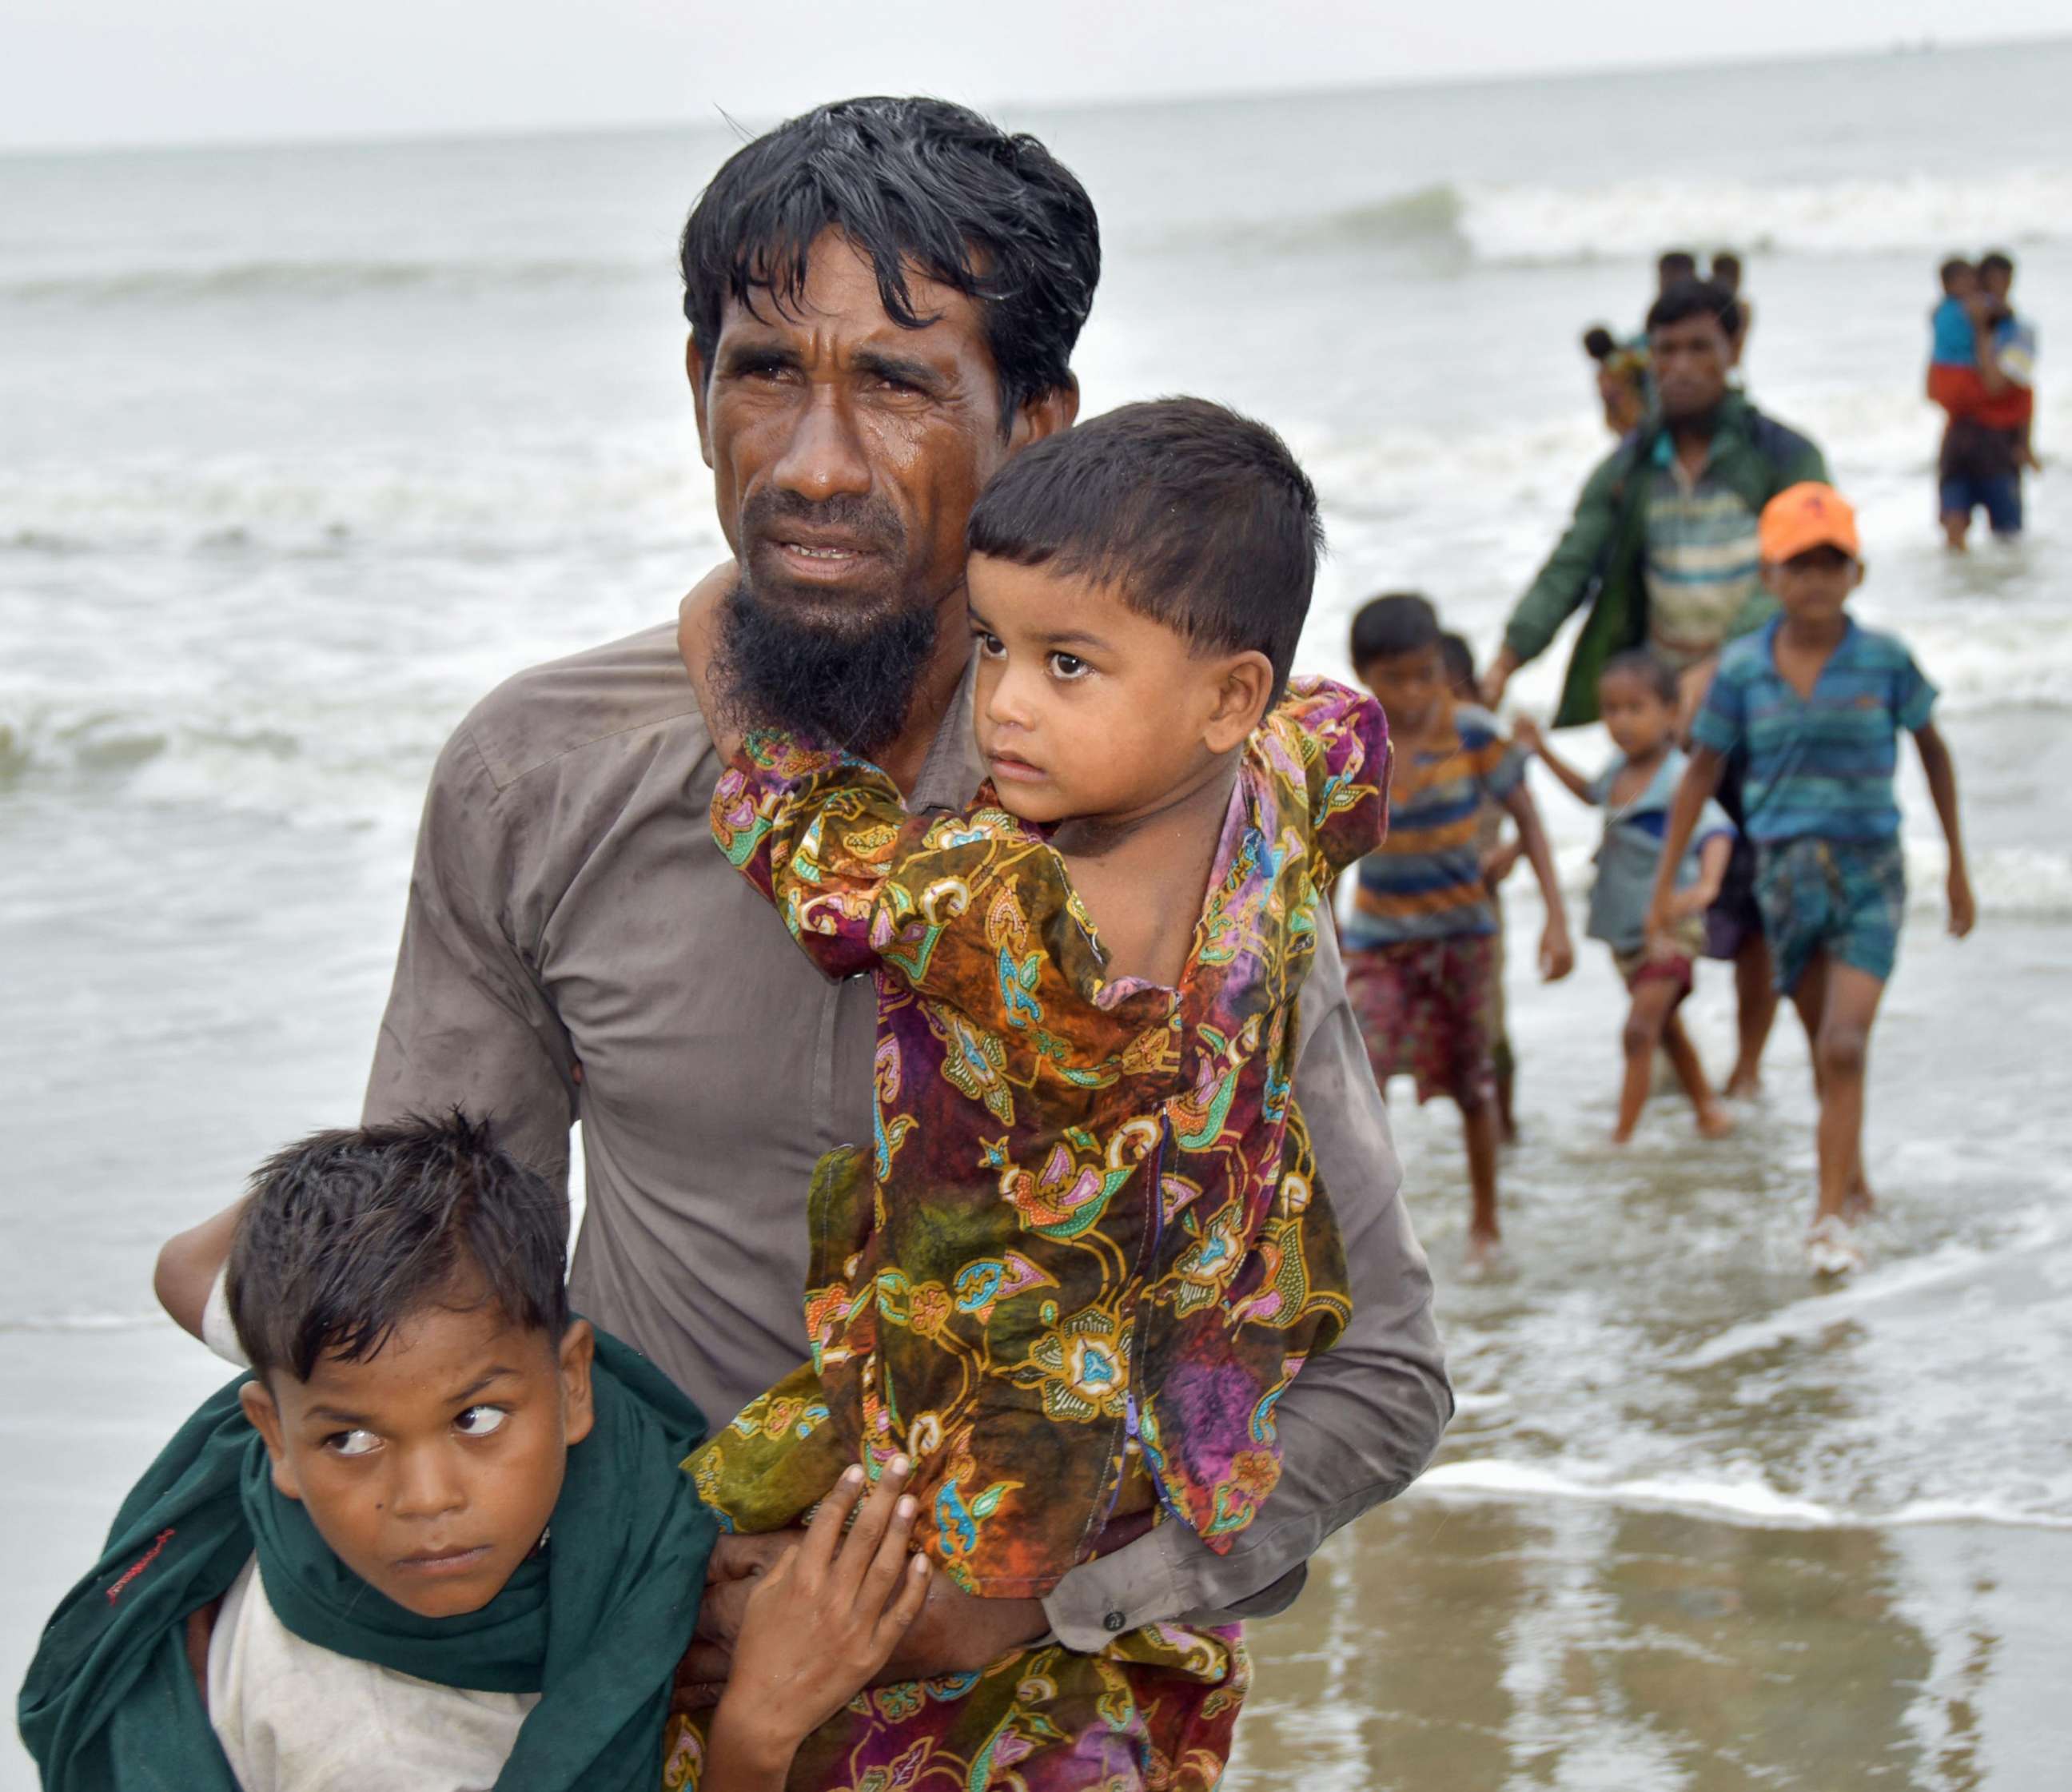 PHOTO: In this Sept. 8, 2017, file photo, Rohingya refugees arriving by boat near Cox's Bazar, Bangladesh, after fleeing Myanmar's strife-torn Rakhine State.